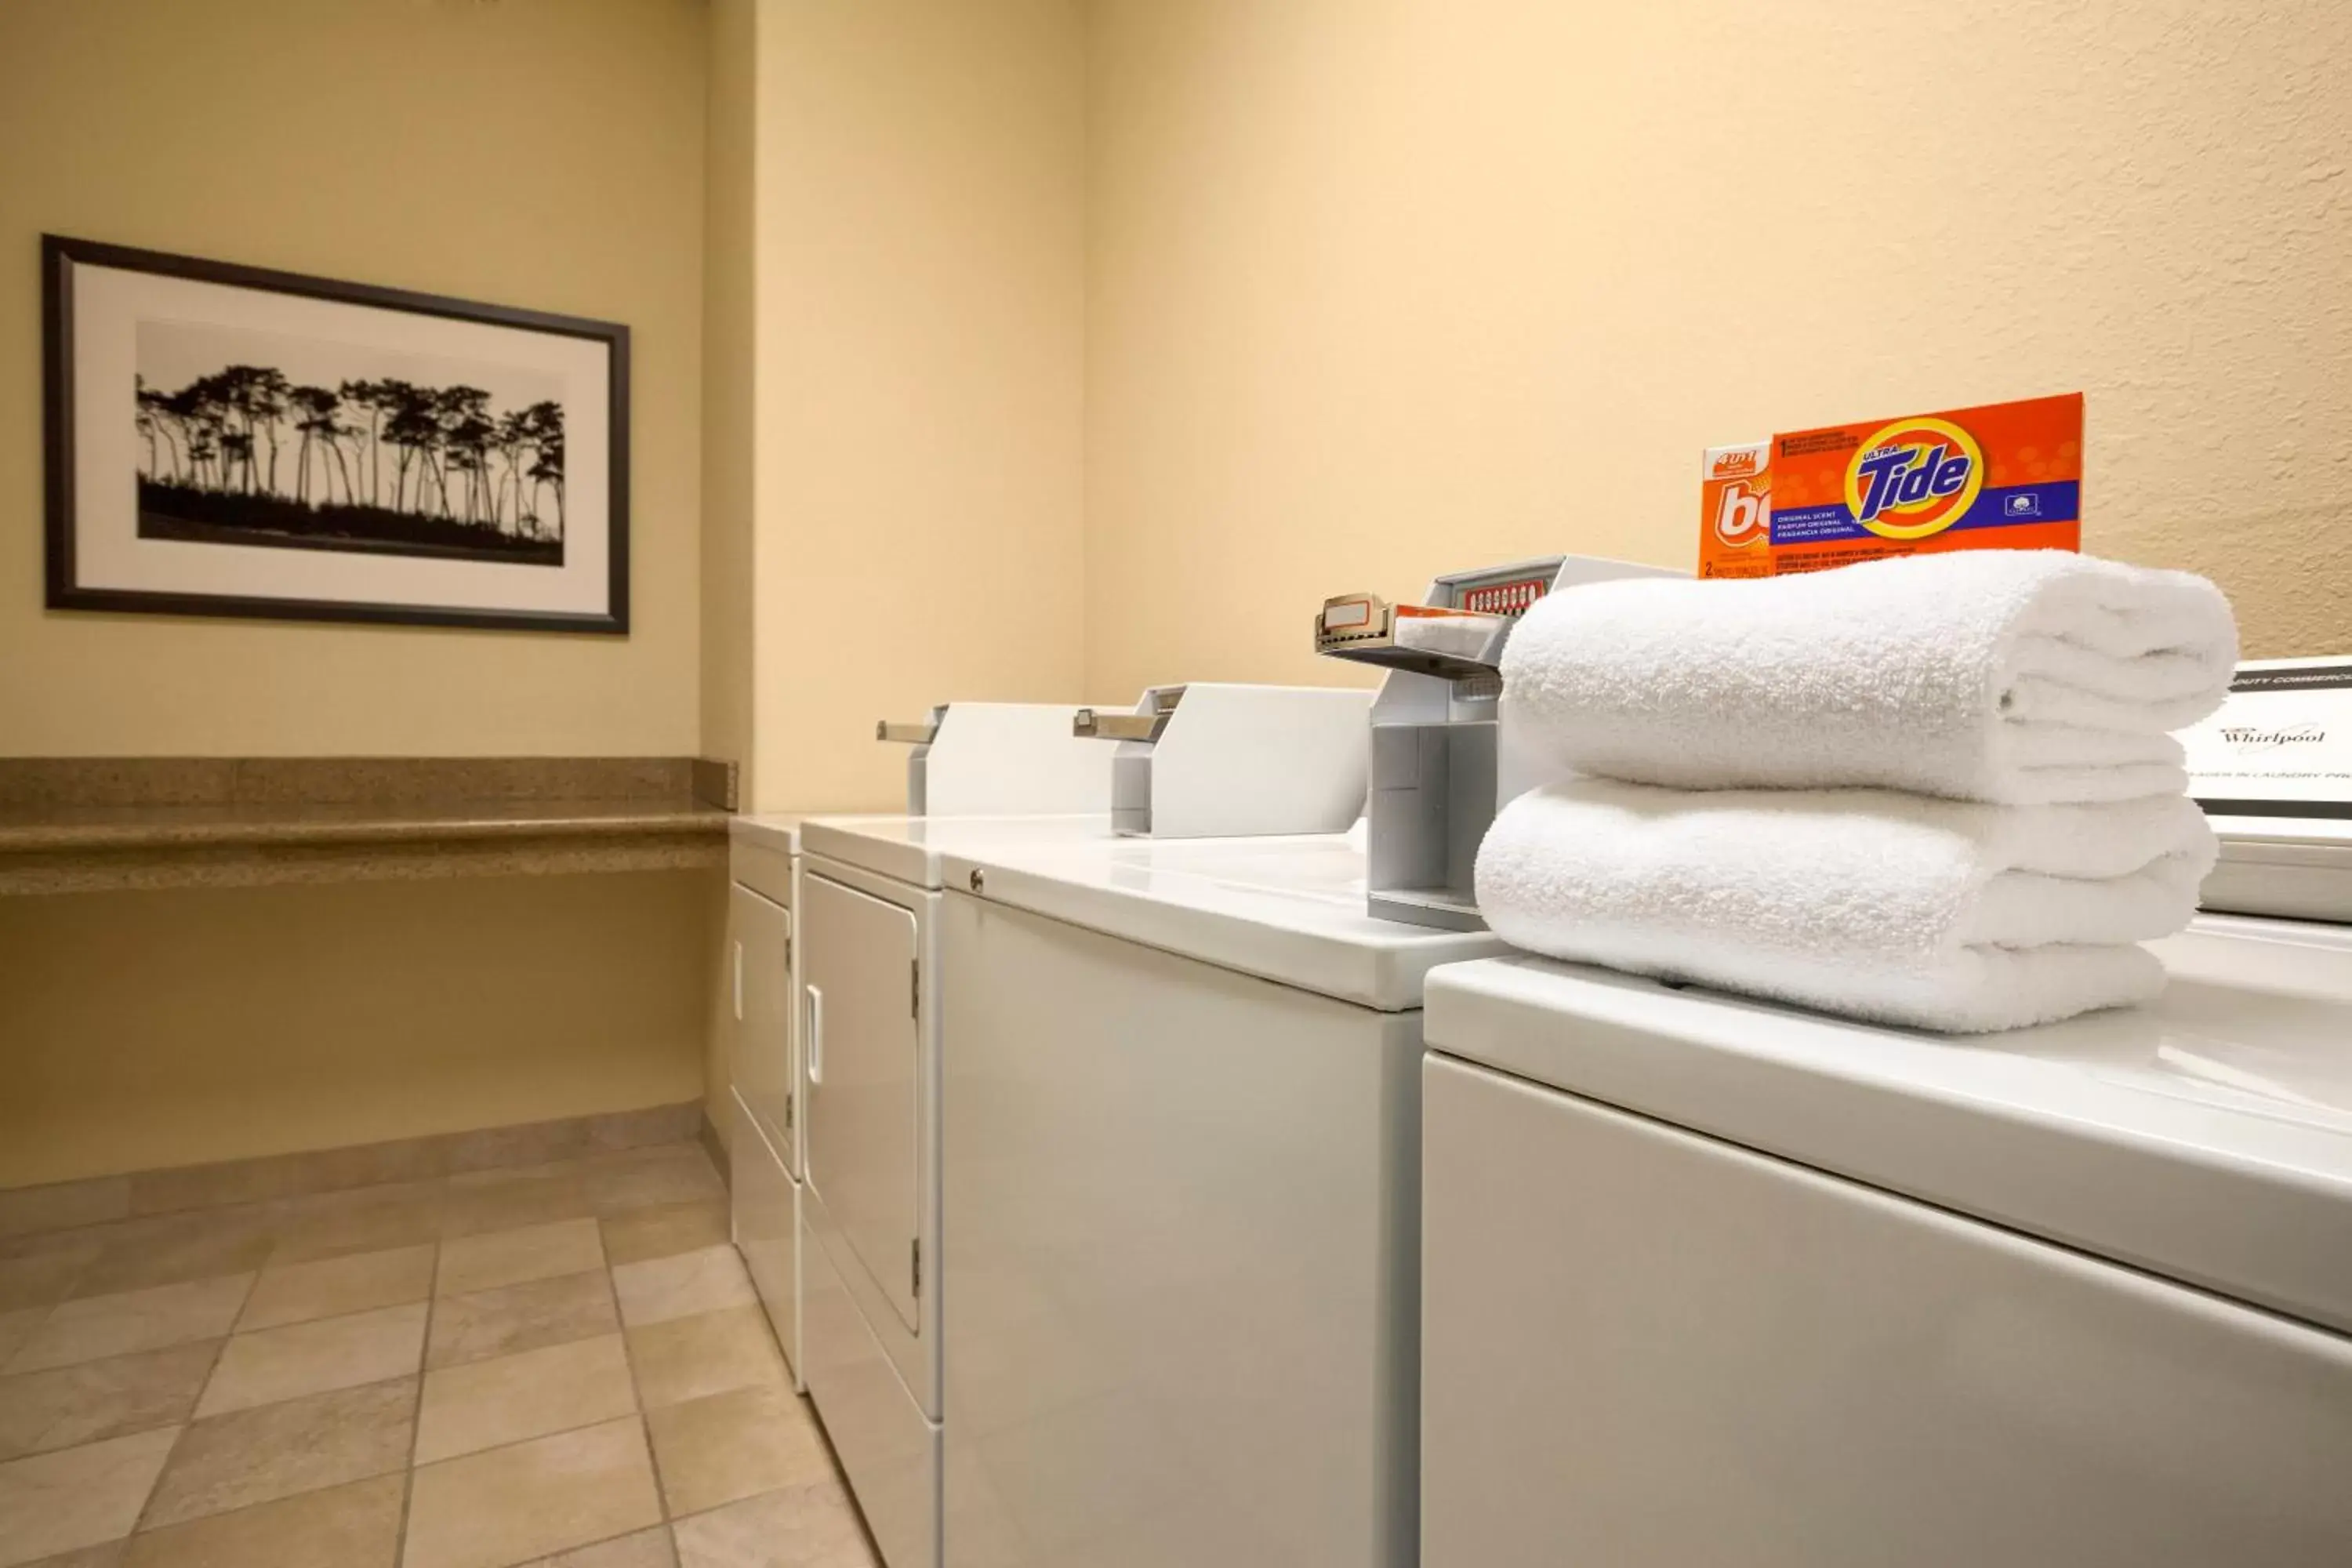 Area and facilities in Country Inn & Suites by Radisson, Seattle-Tacoma International Airport, WA